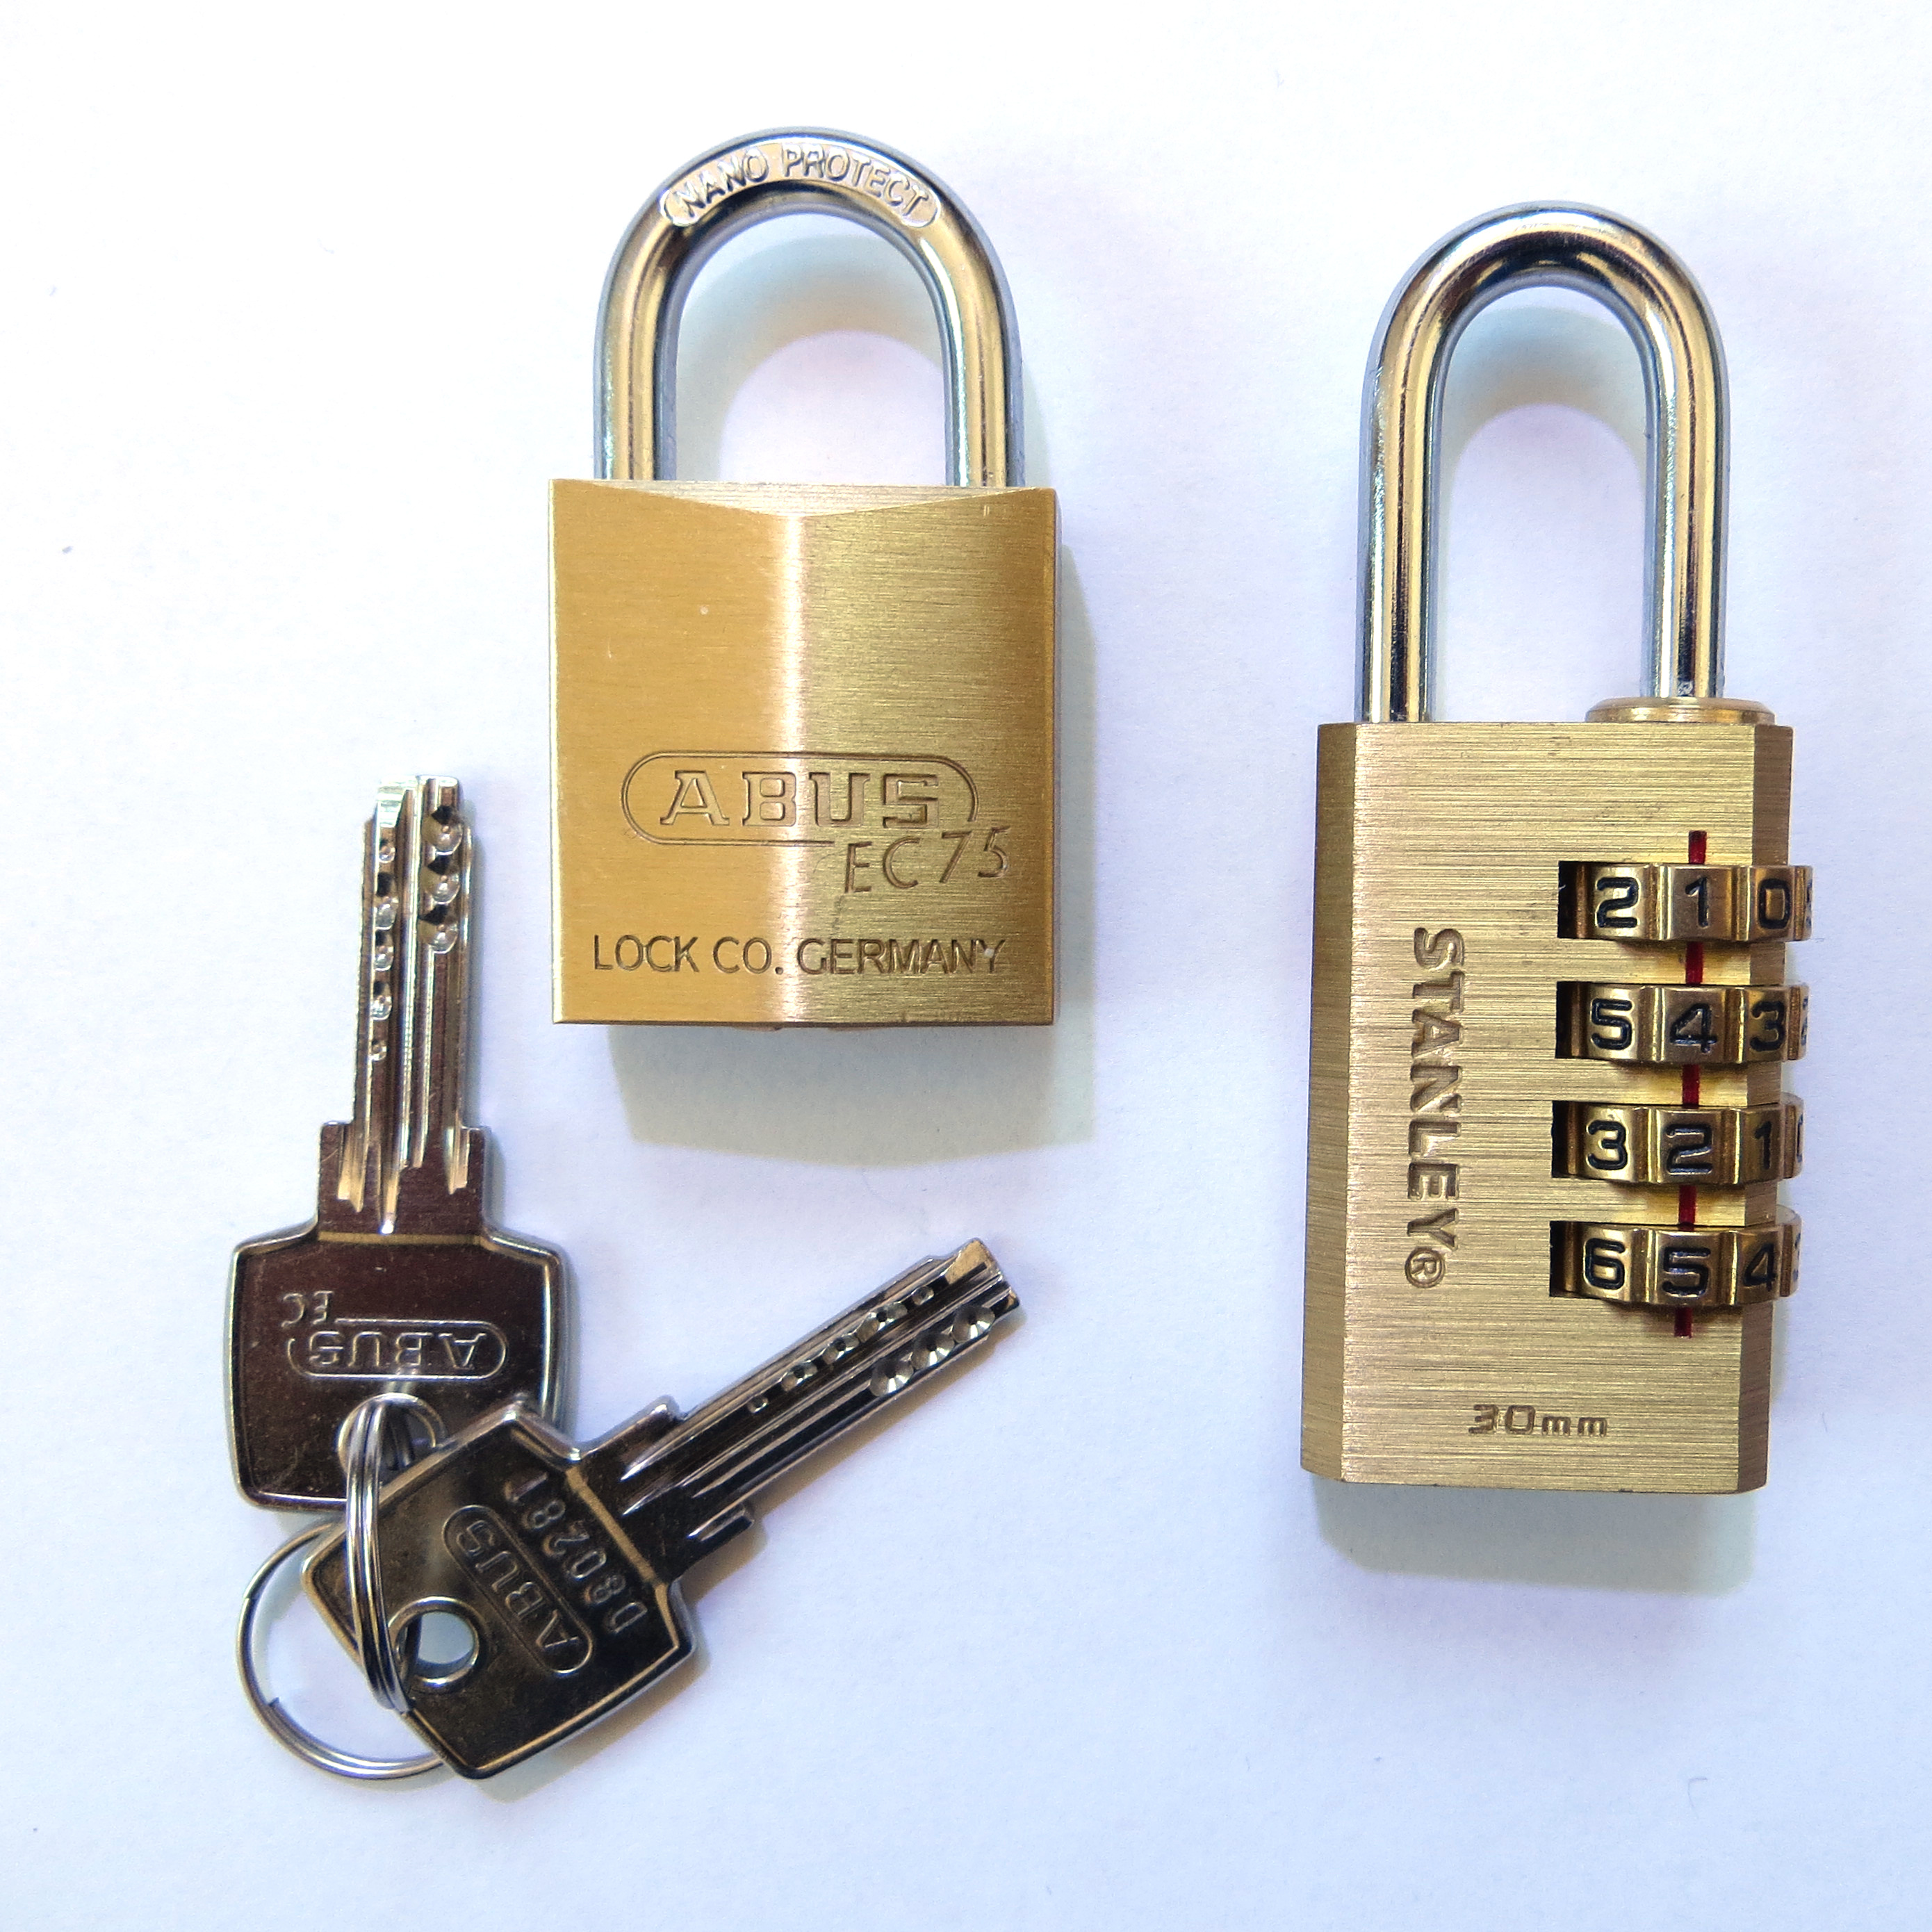 Best Locks for Staying in Hostels (Avoid Theft)